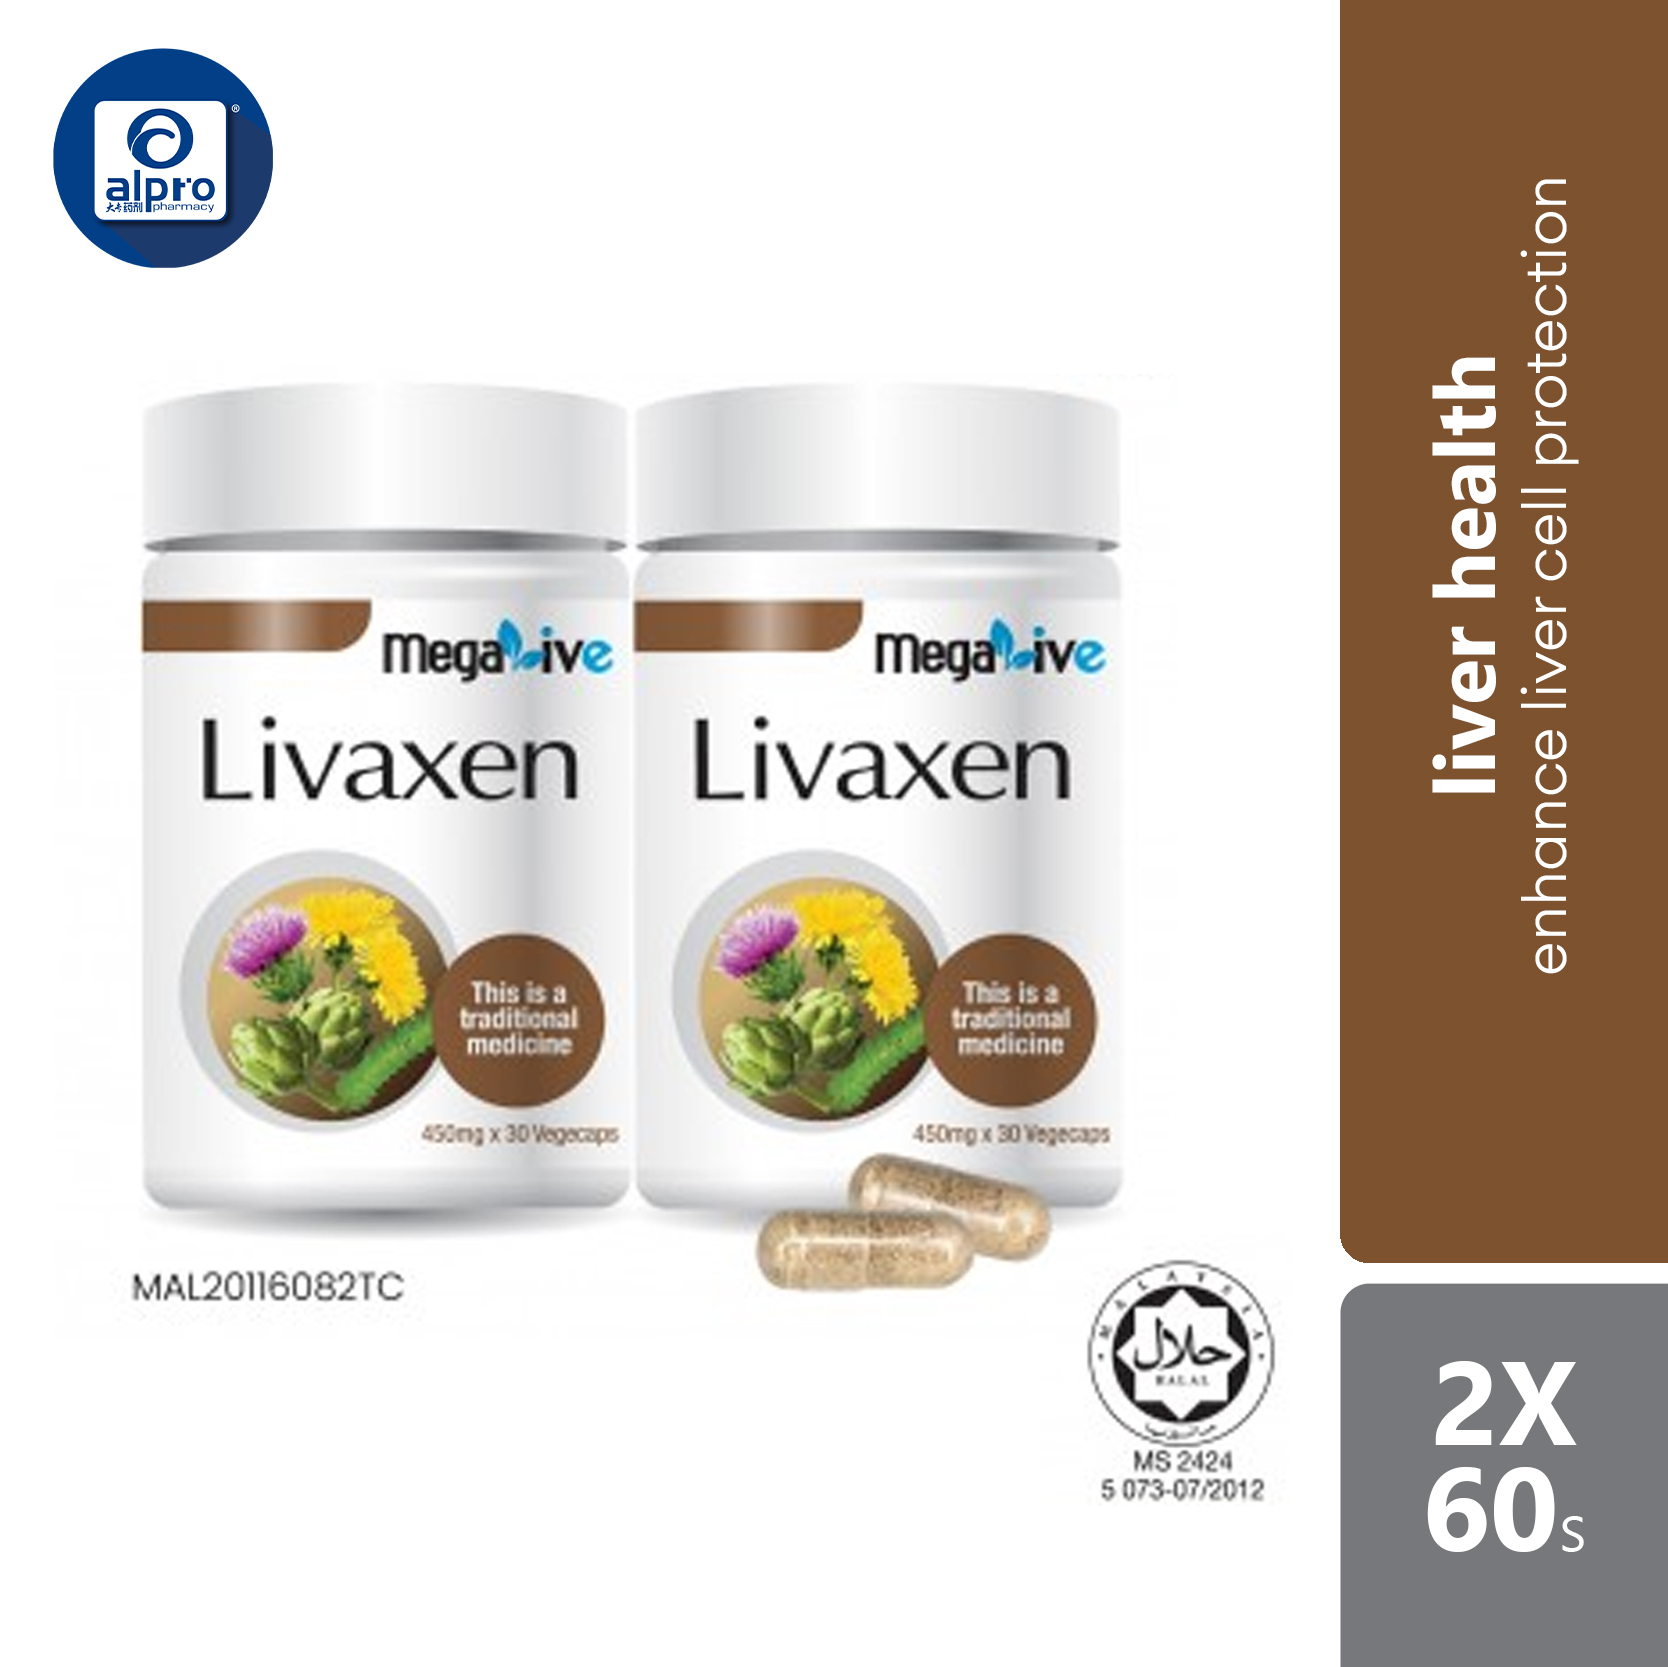 Megalive Livaxen 2x30s  High Bioavailability And Better Absorption - Alpro  Pharmacy